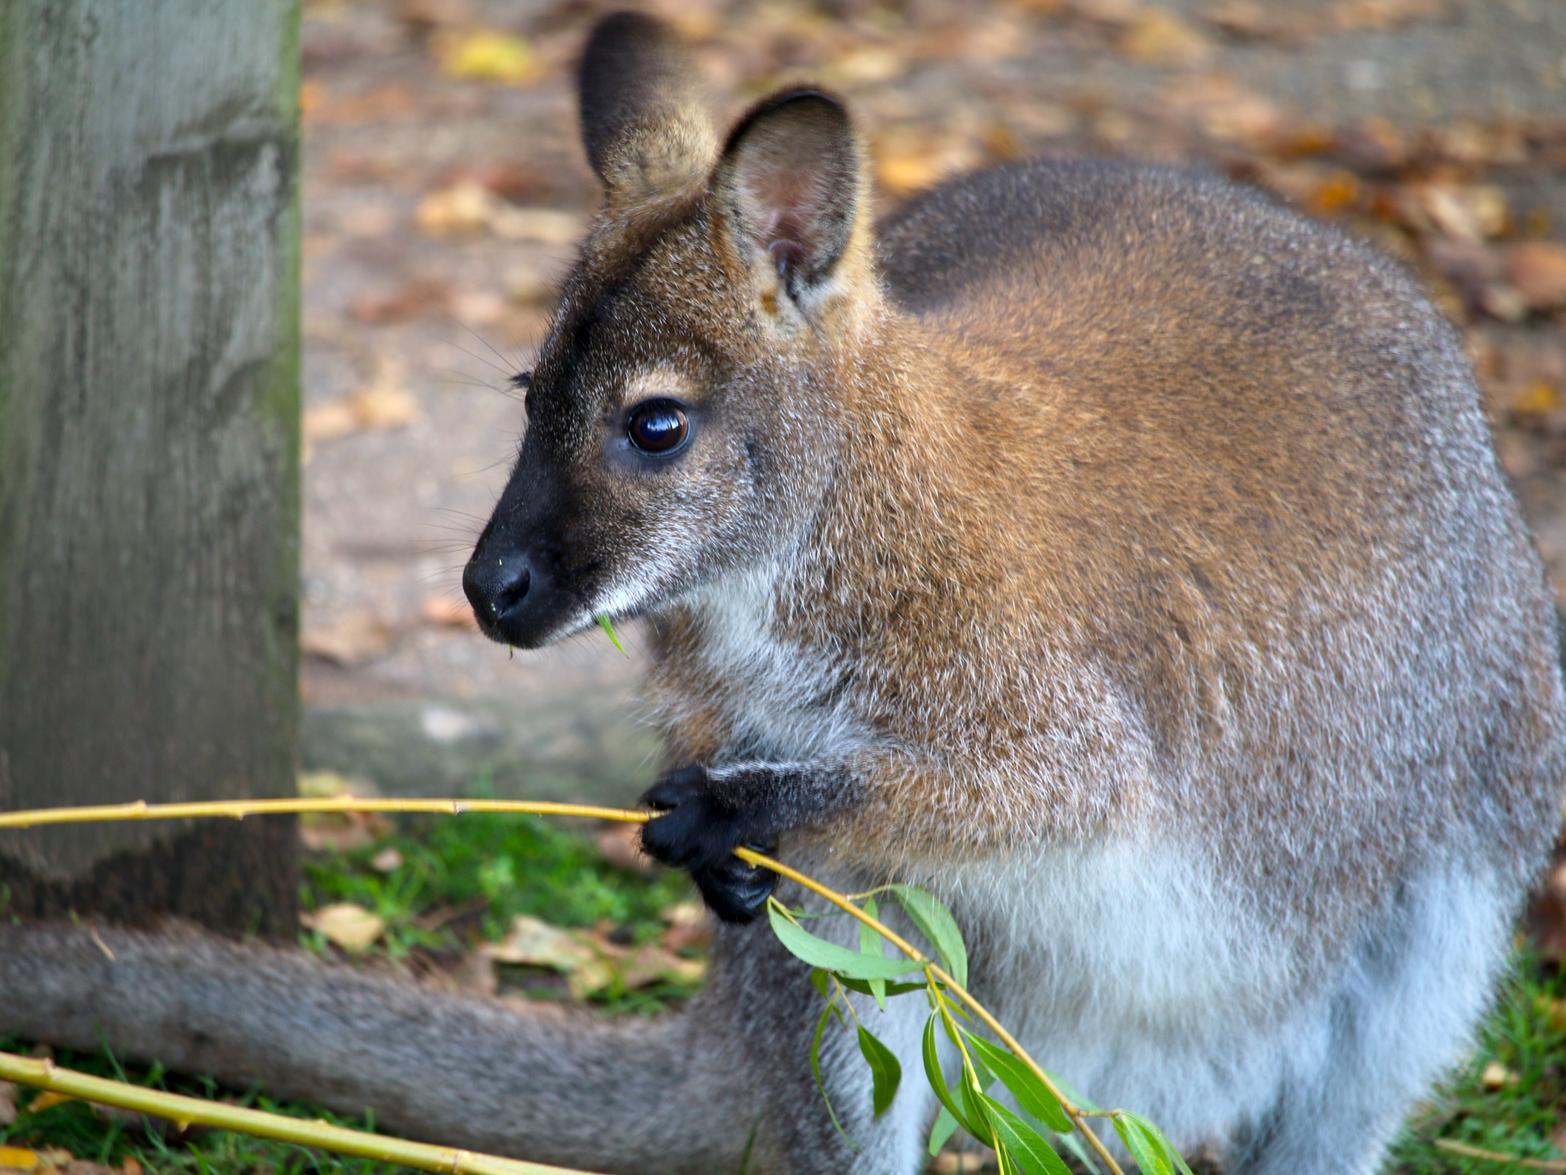 An injuredwallaby left for dead after being shot in Berkshire, was rescued by YWP. Wilding is now enjoying his new home after being nursed back to health by rangers.